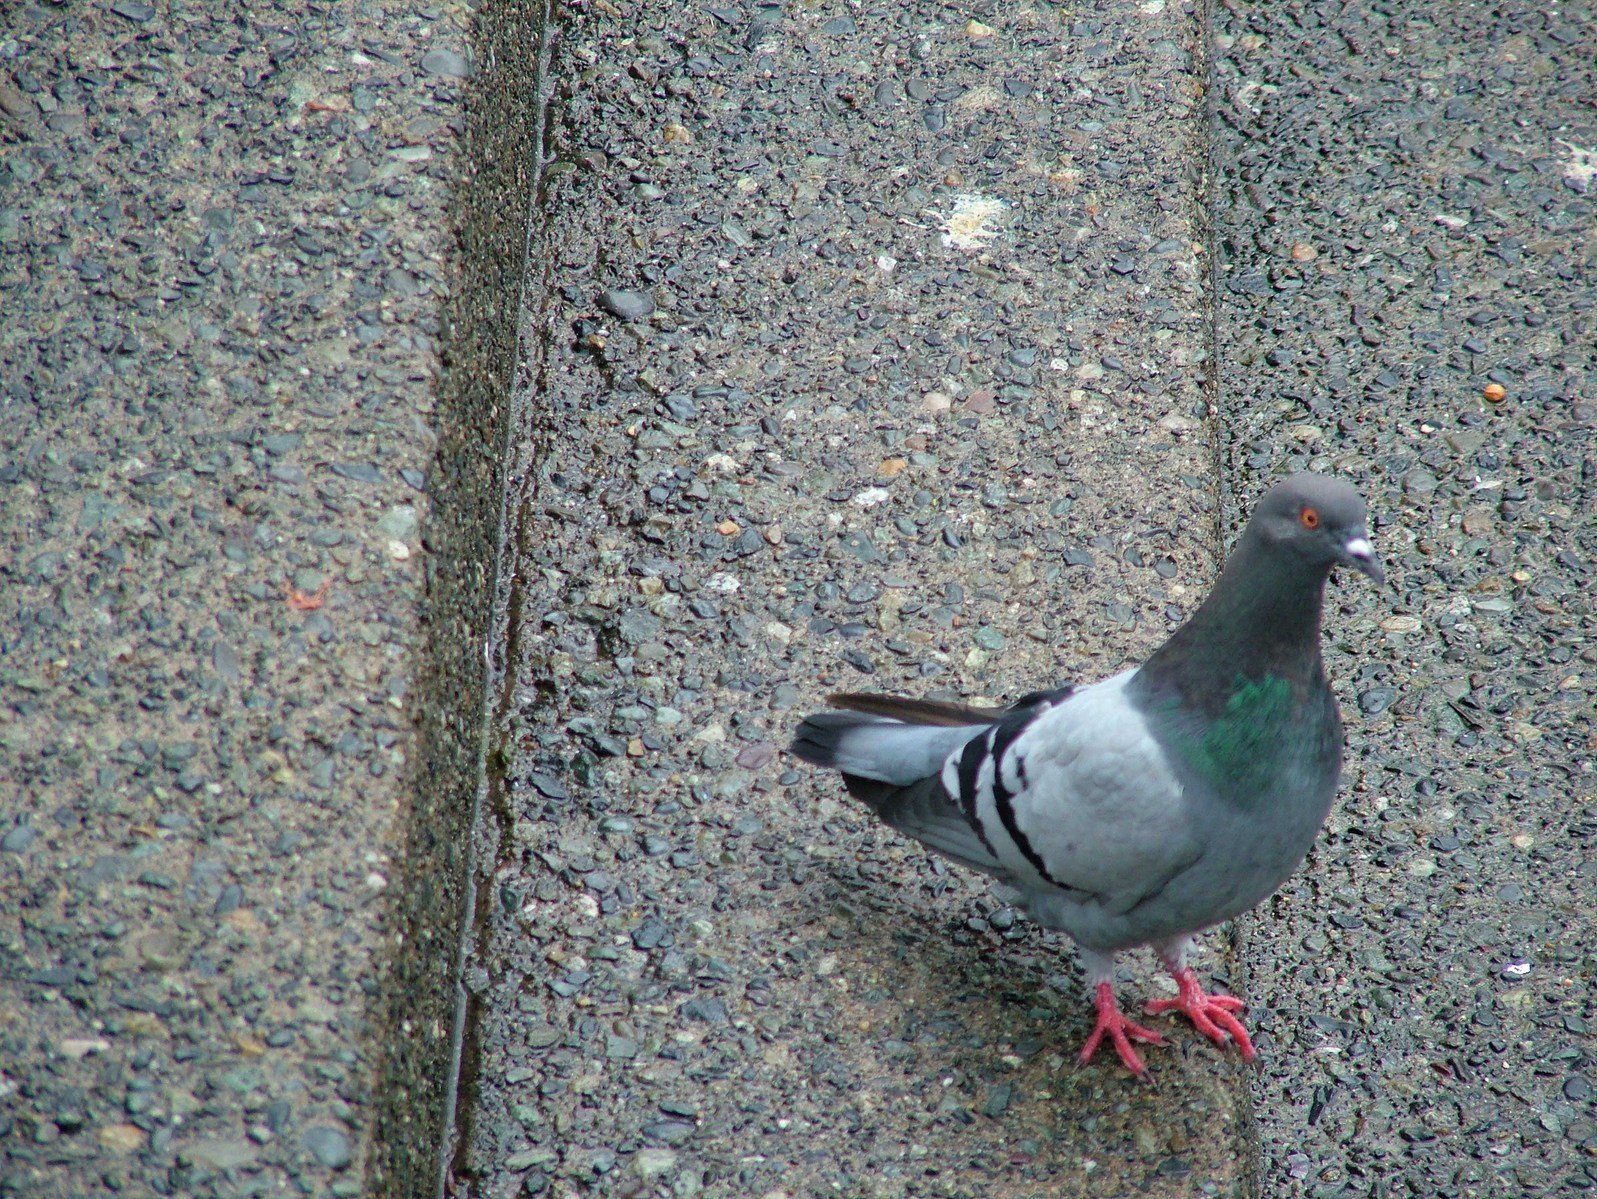 a pigeon walking on the pavement next to some stones